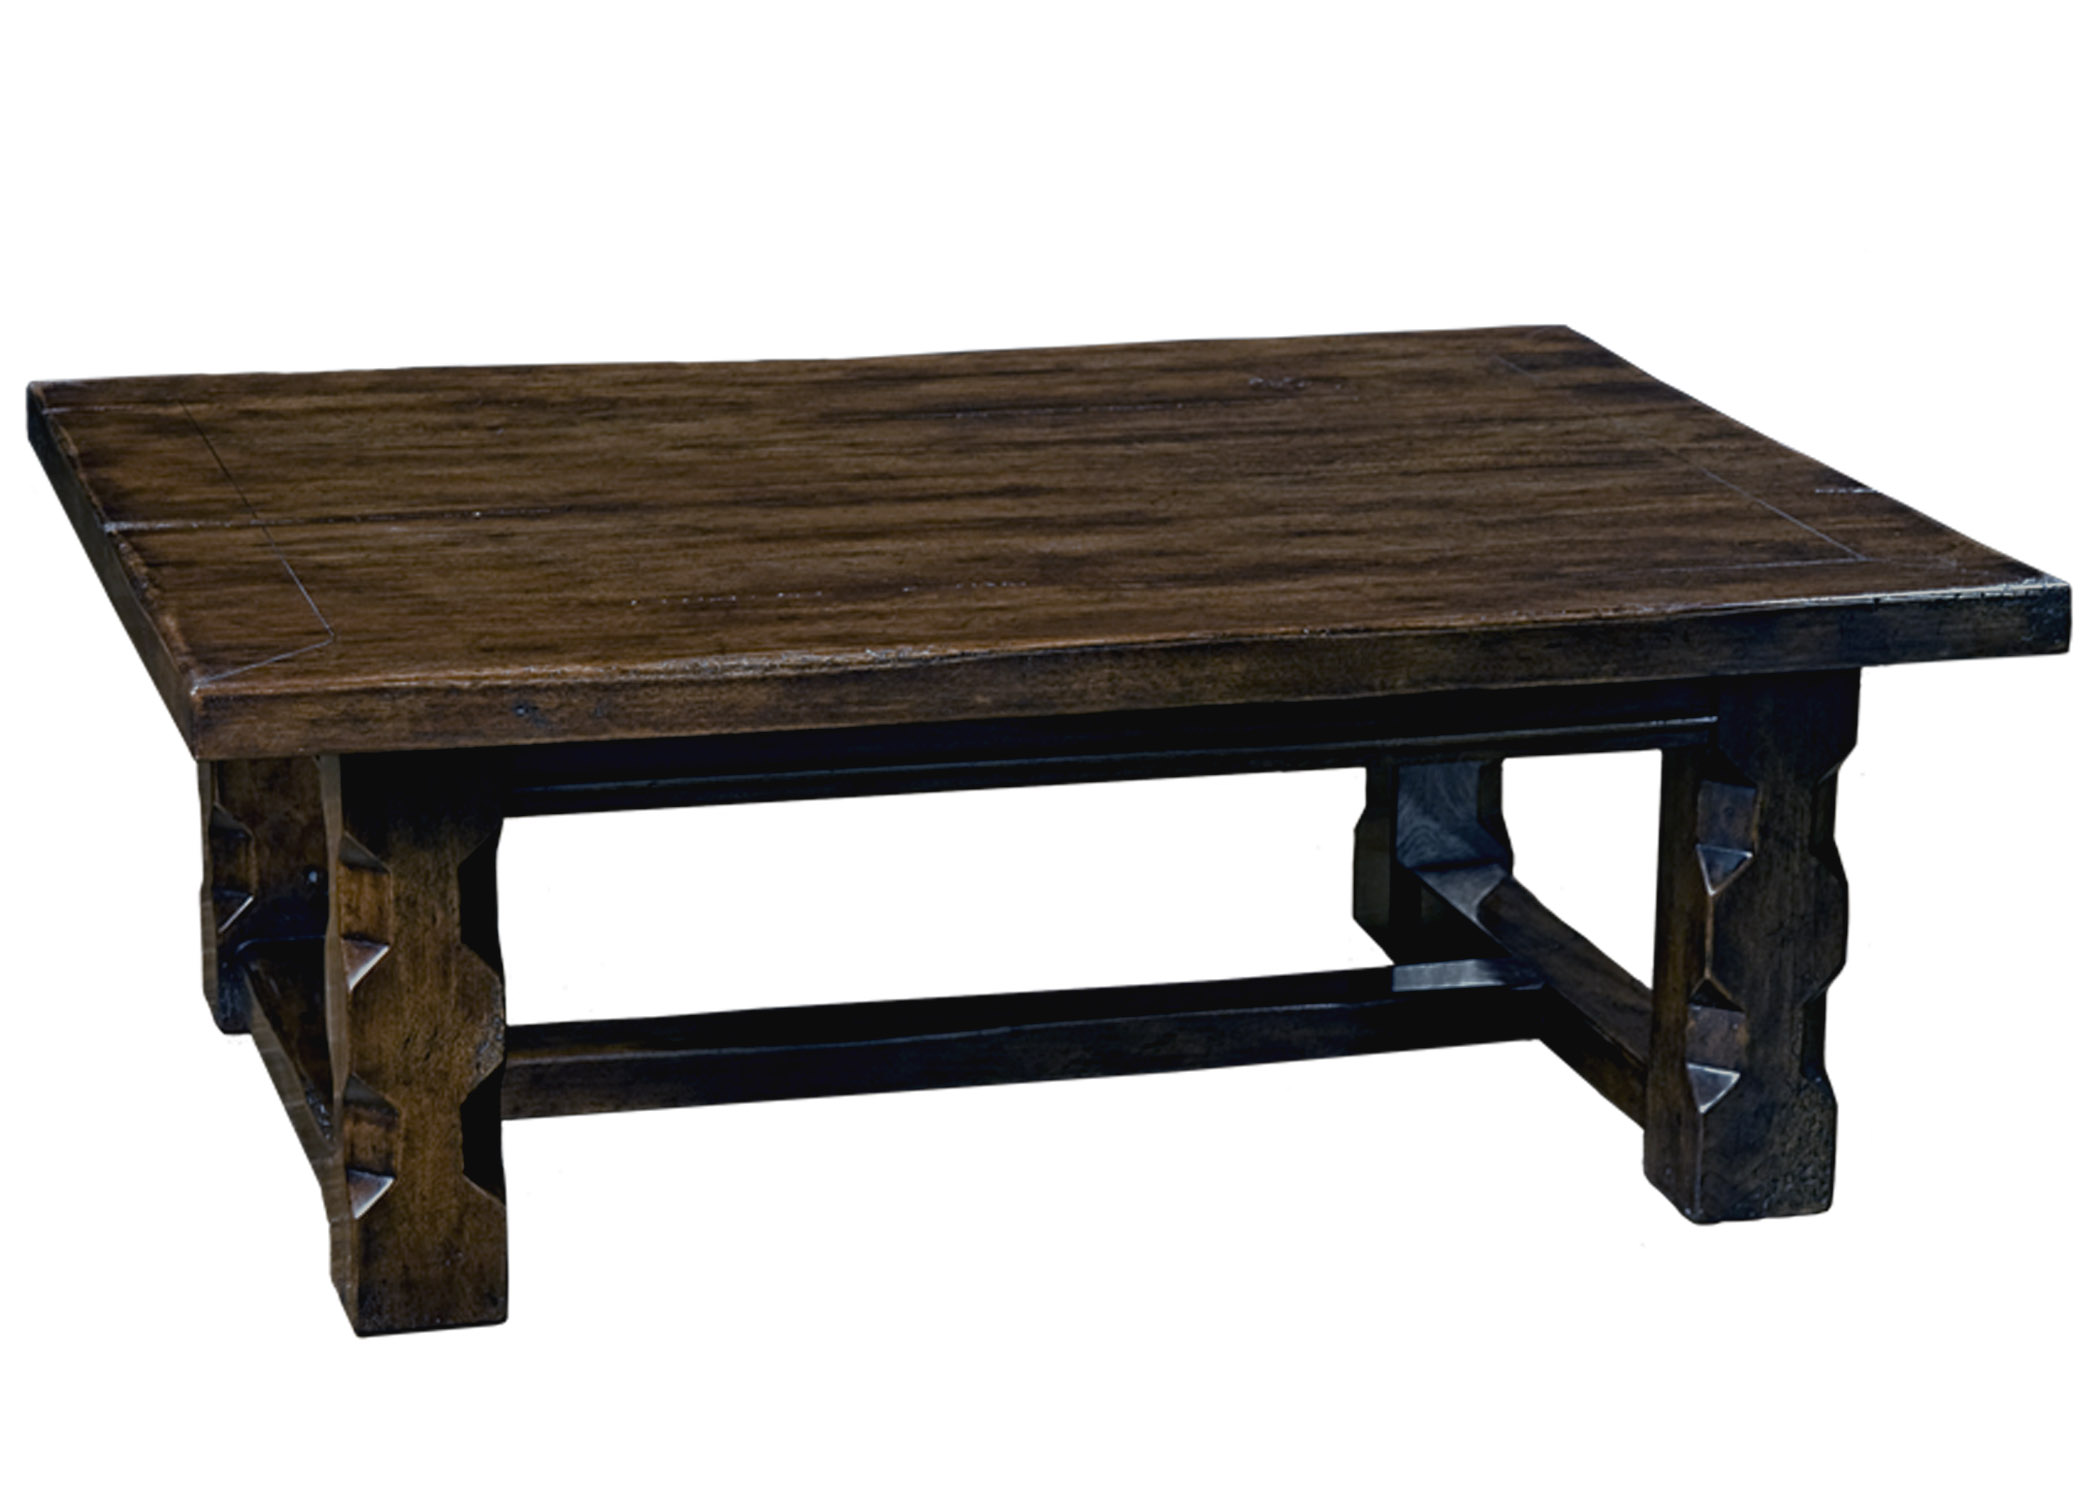 Coventry transitional rustic coffee cocktail table by Woodland furniture in Idaho Falls USA